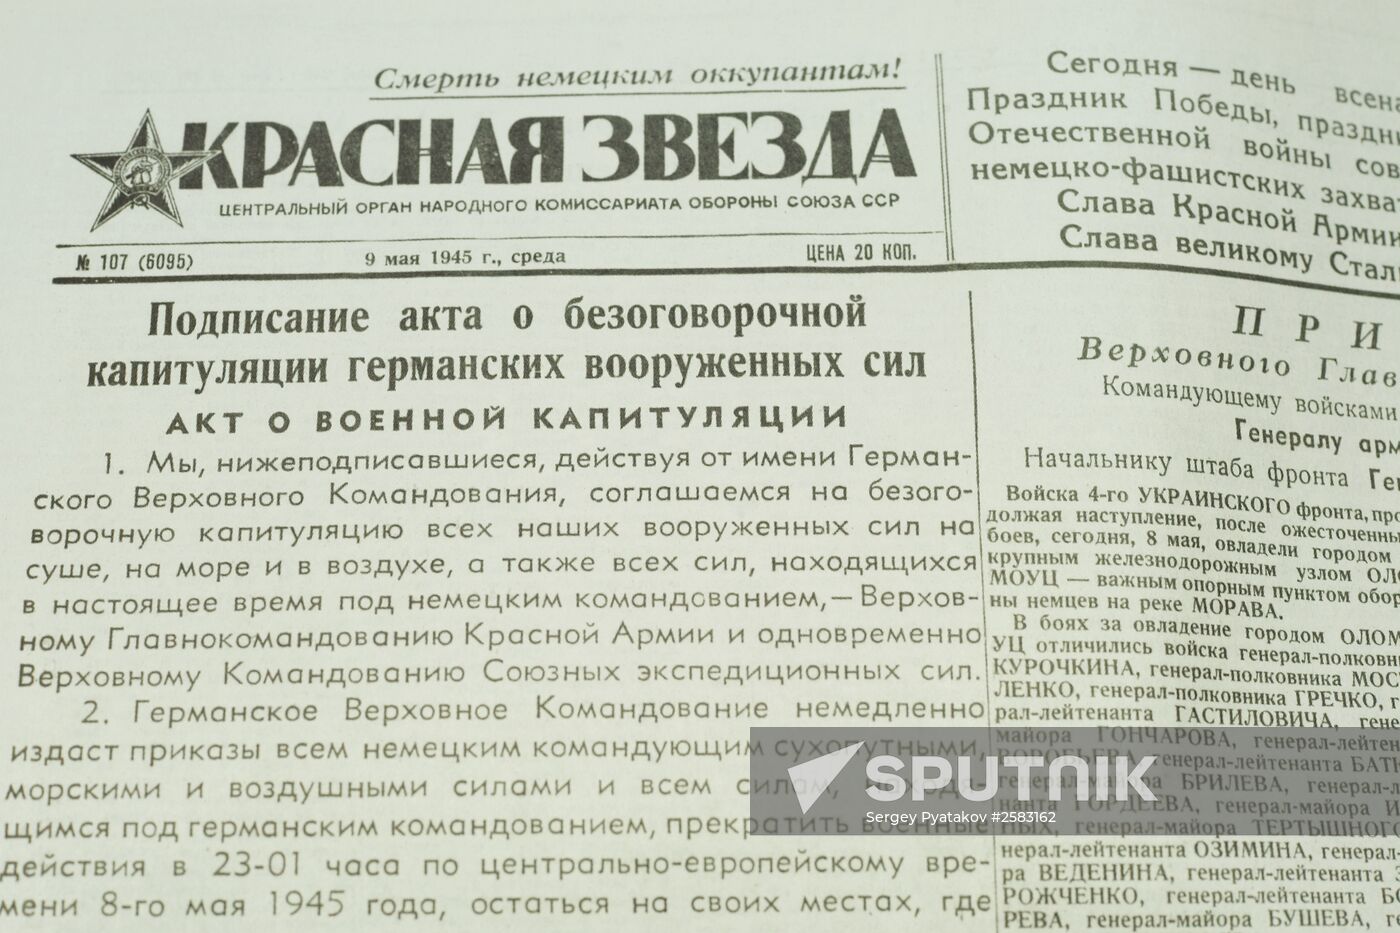 Photos and publications of Red Star newspaper during Great Patritotic War